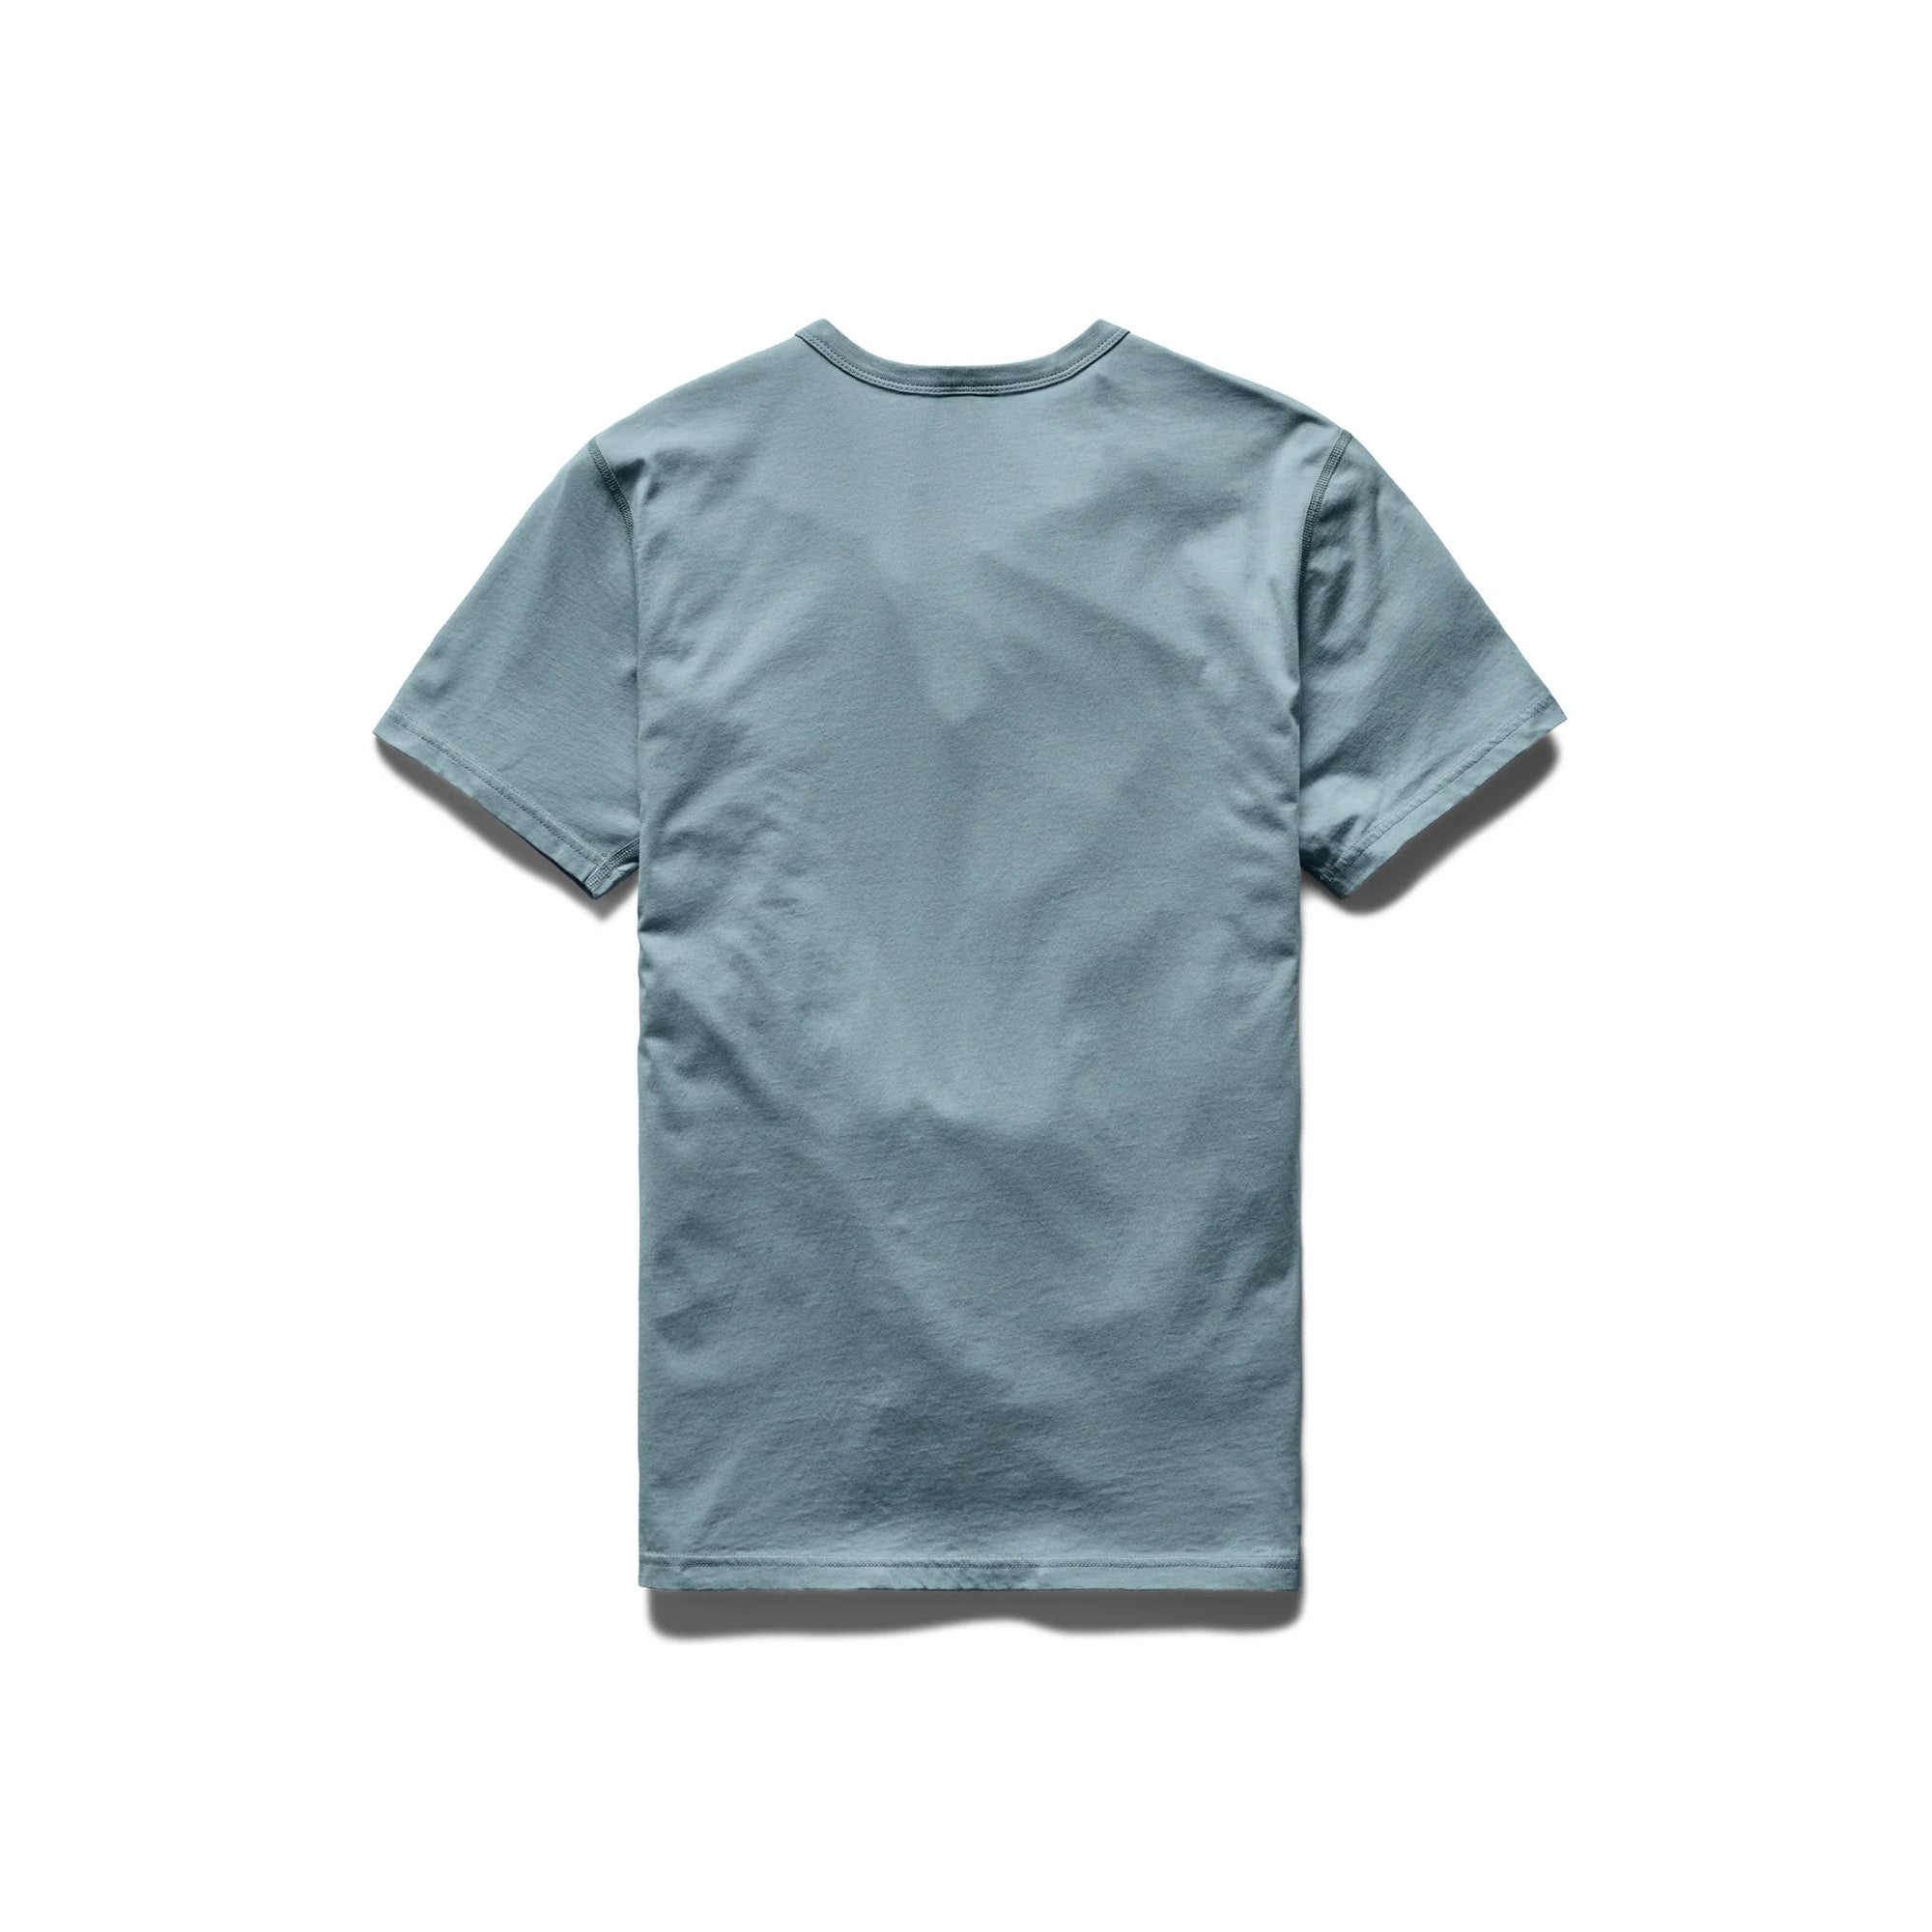 Reigning Champ Lightweight Jersey T-Shirt in Ink